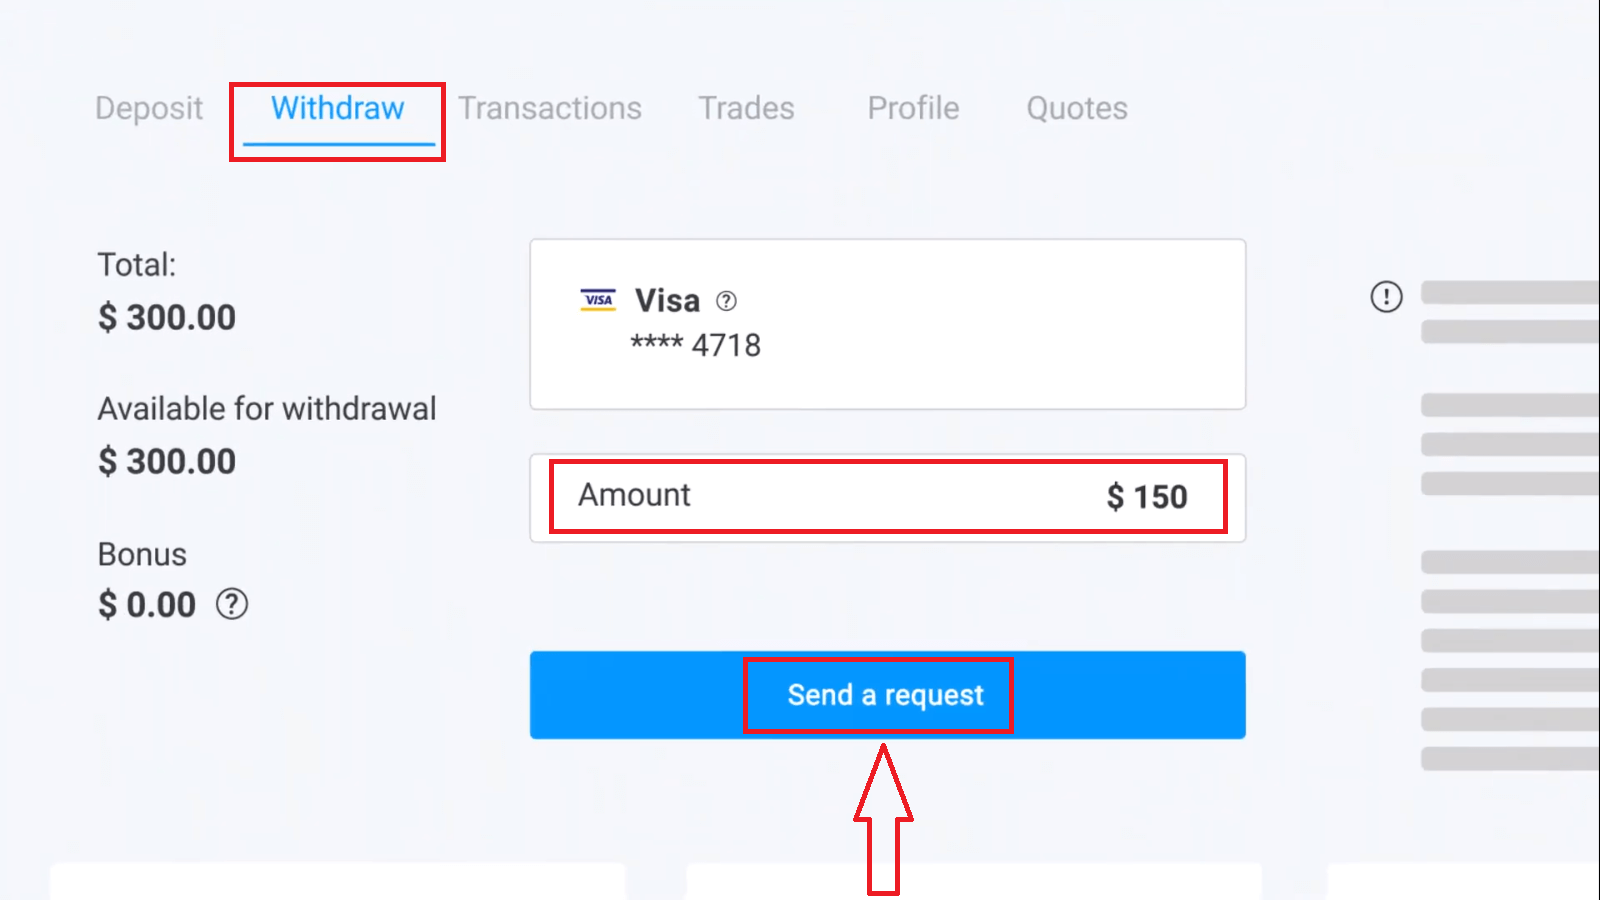 How to Register and Withdraw Money at Olymp Trade